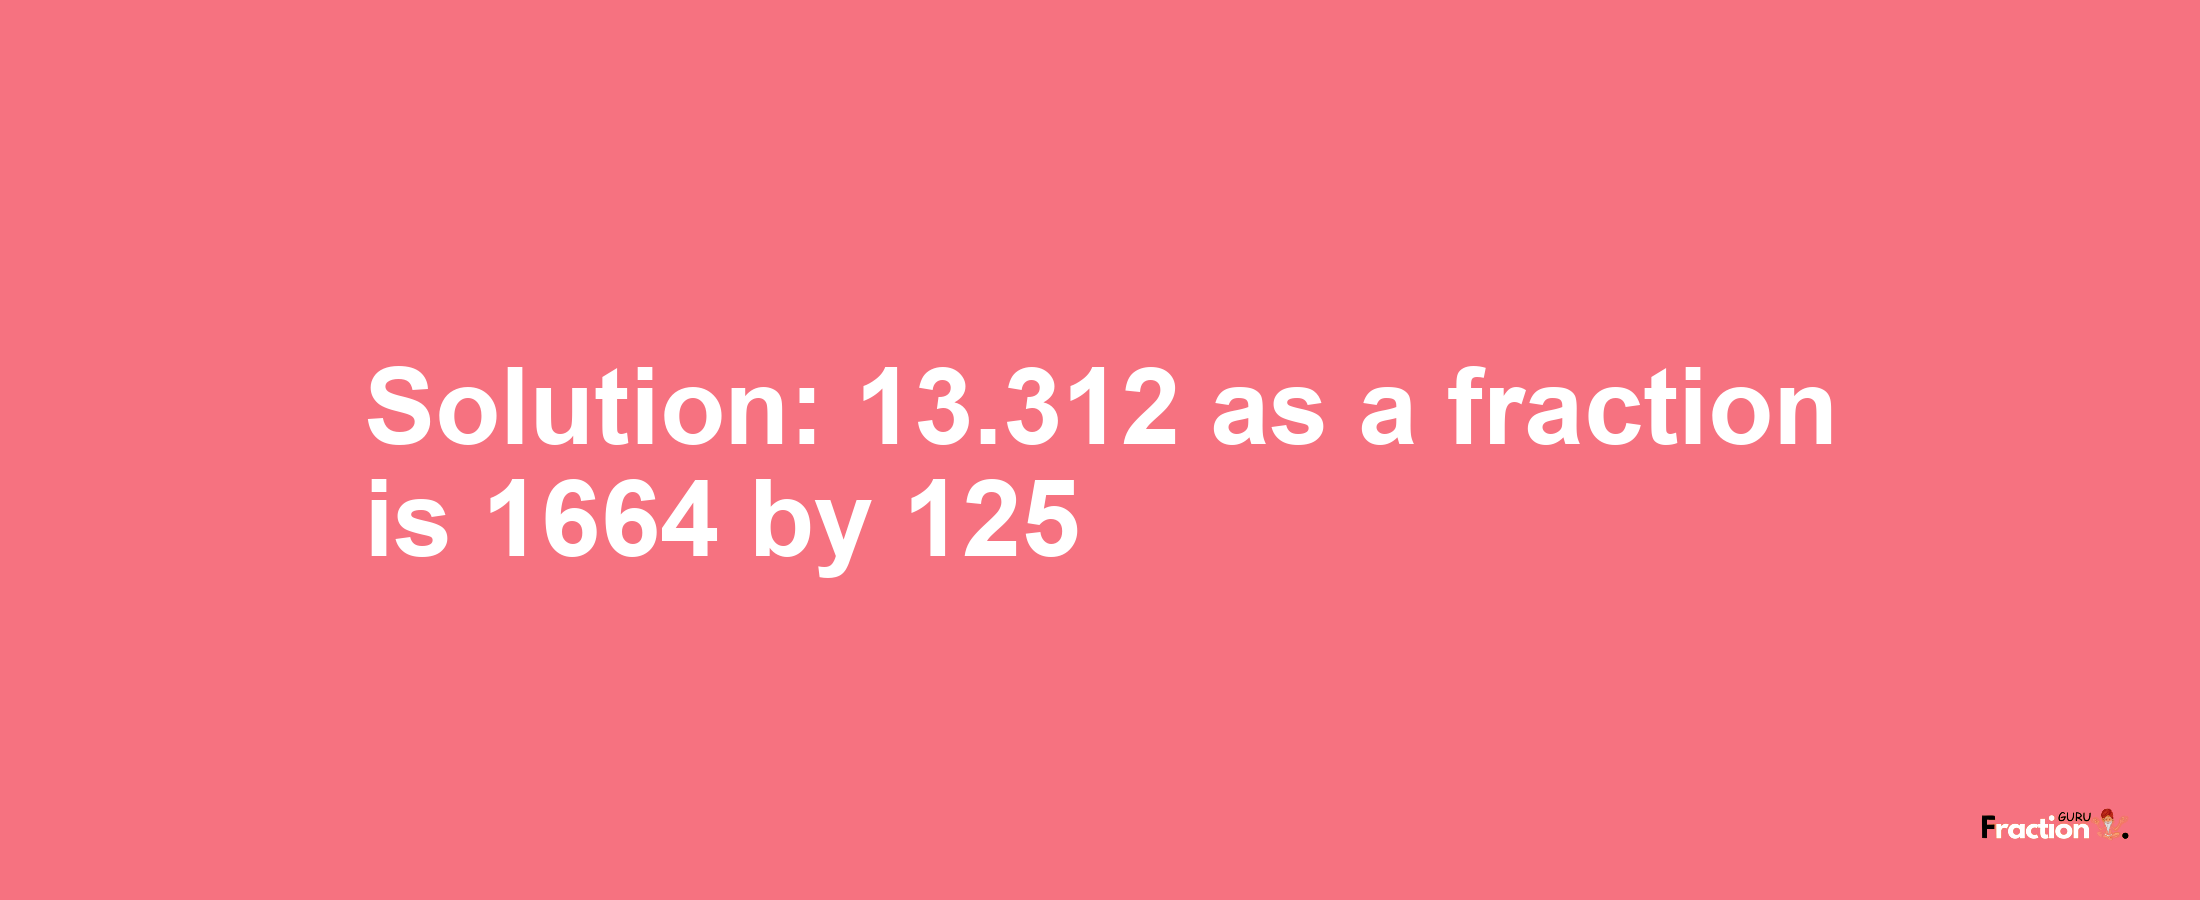 Solution:13.312 as a fraction is 1664/125